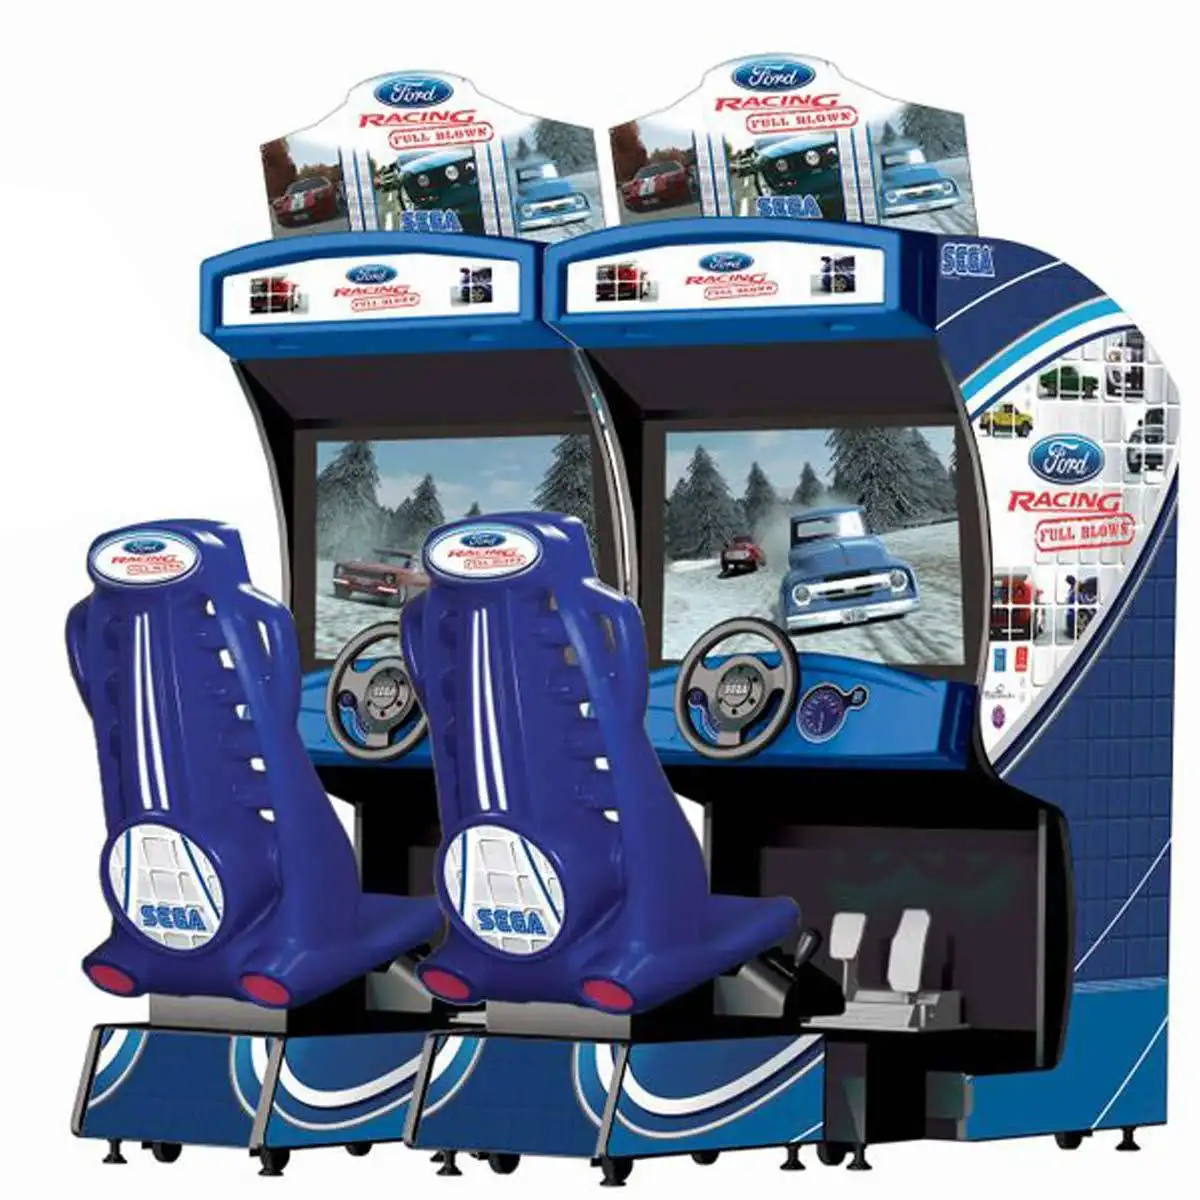 Indoor Sport Amusement High Quality Coin Operated Arcade Ford Racing Car Game Machine For Akusement Park For Sale